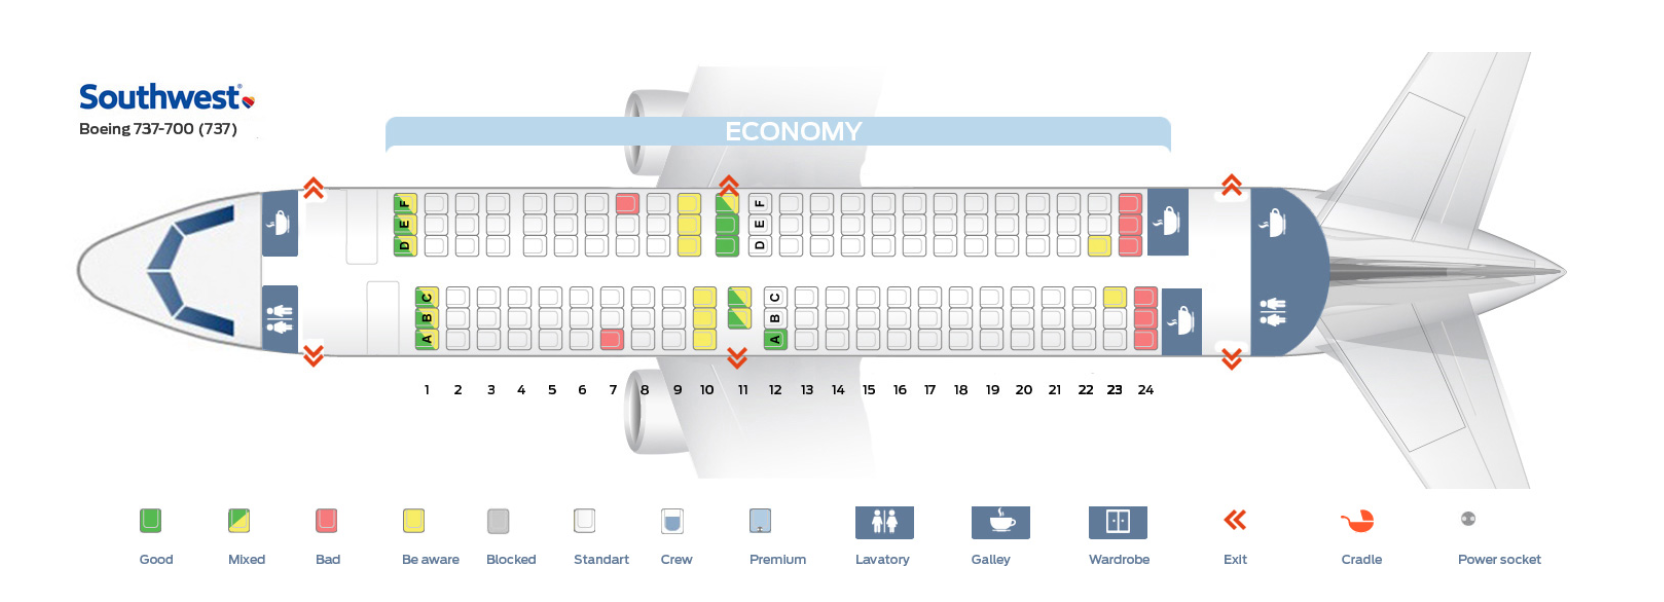 how to get seat assignments on southwest airlines